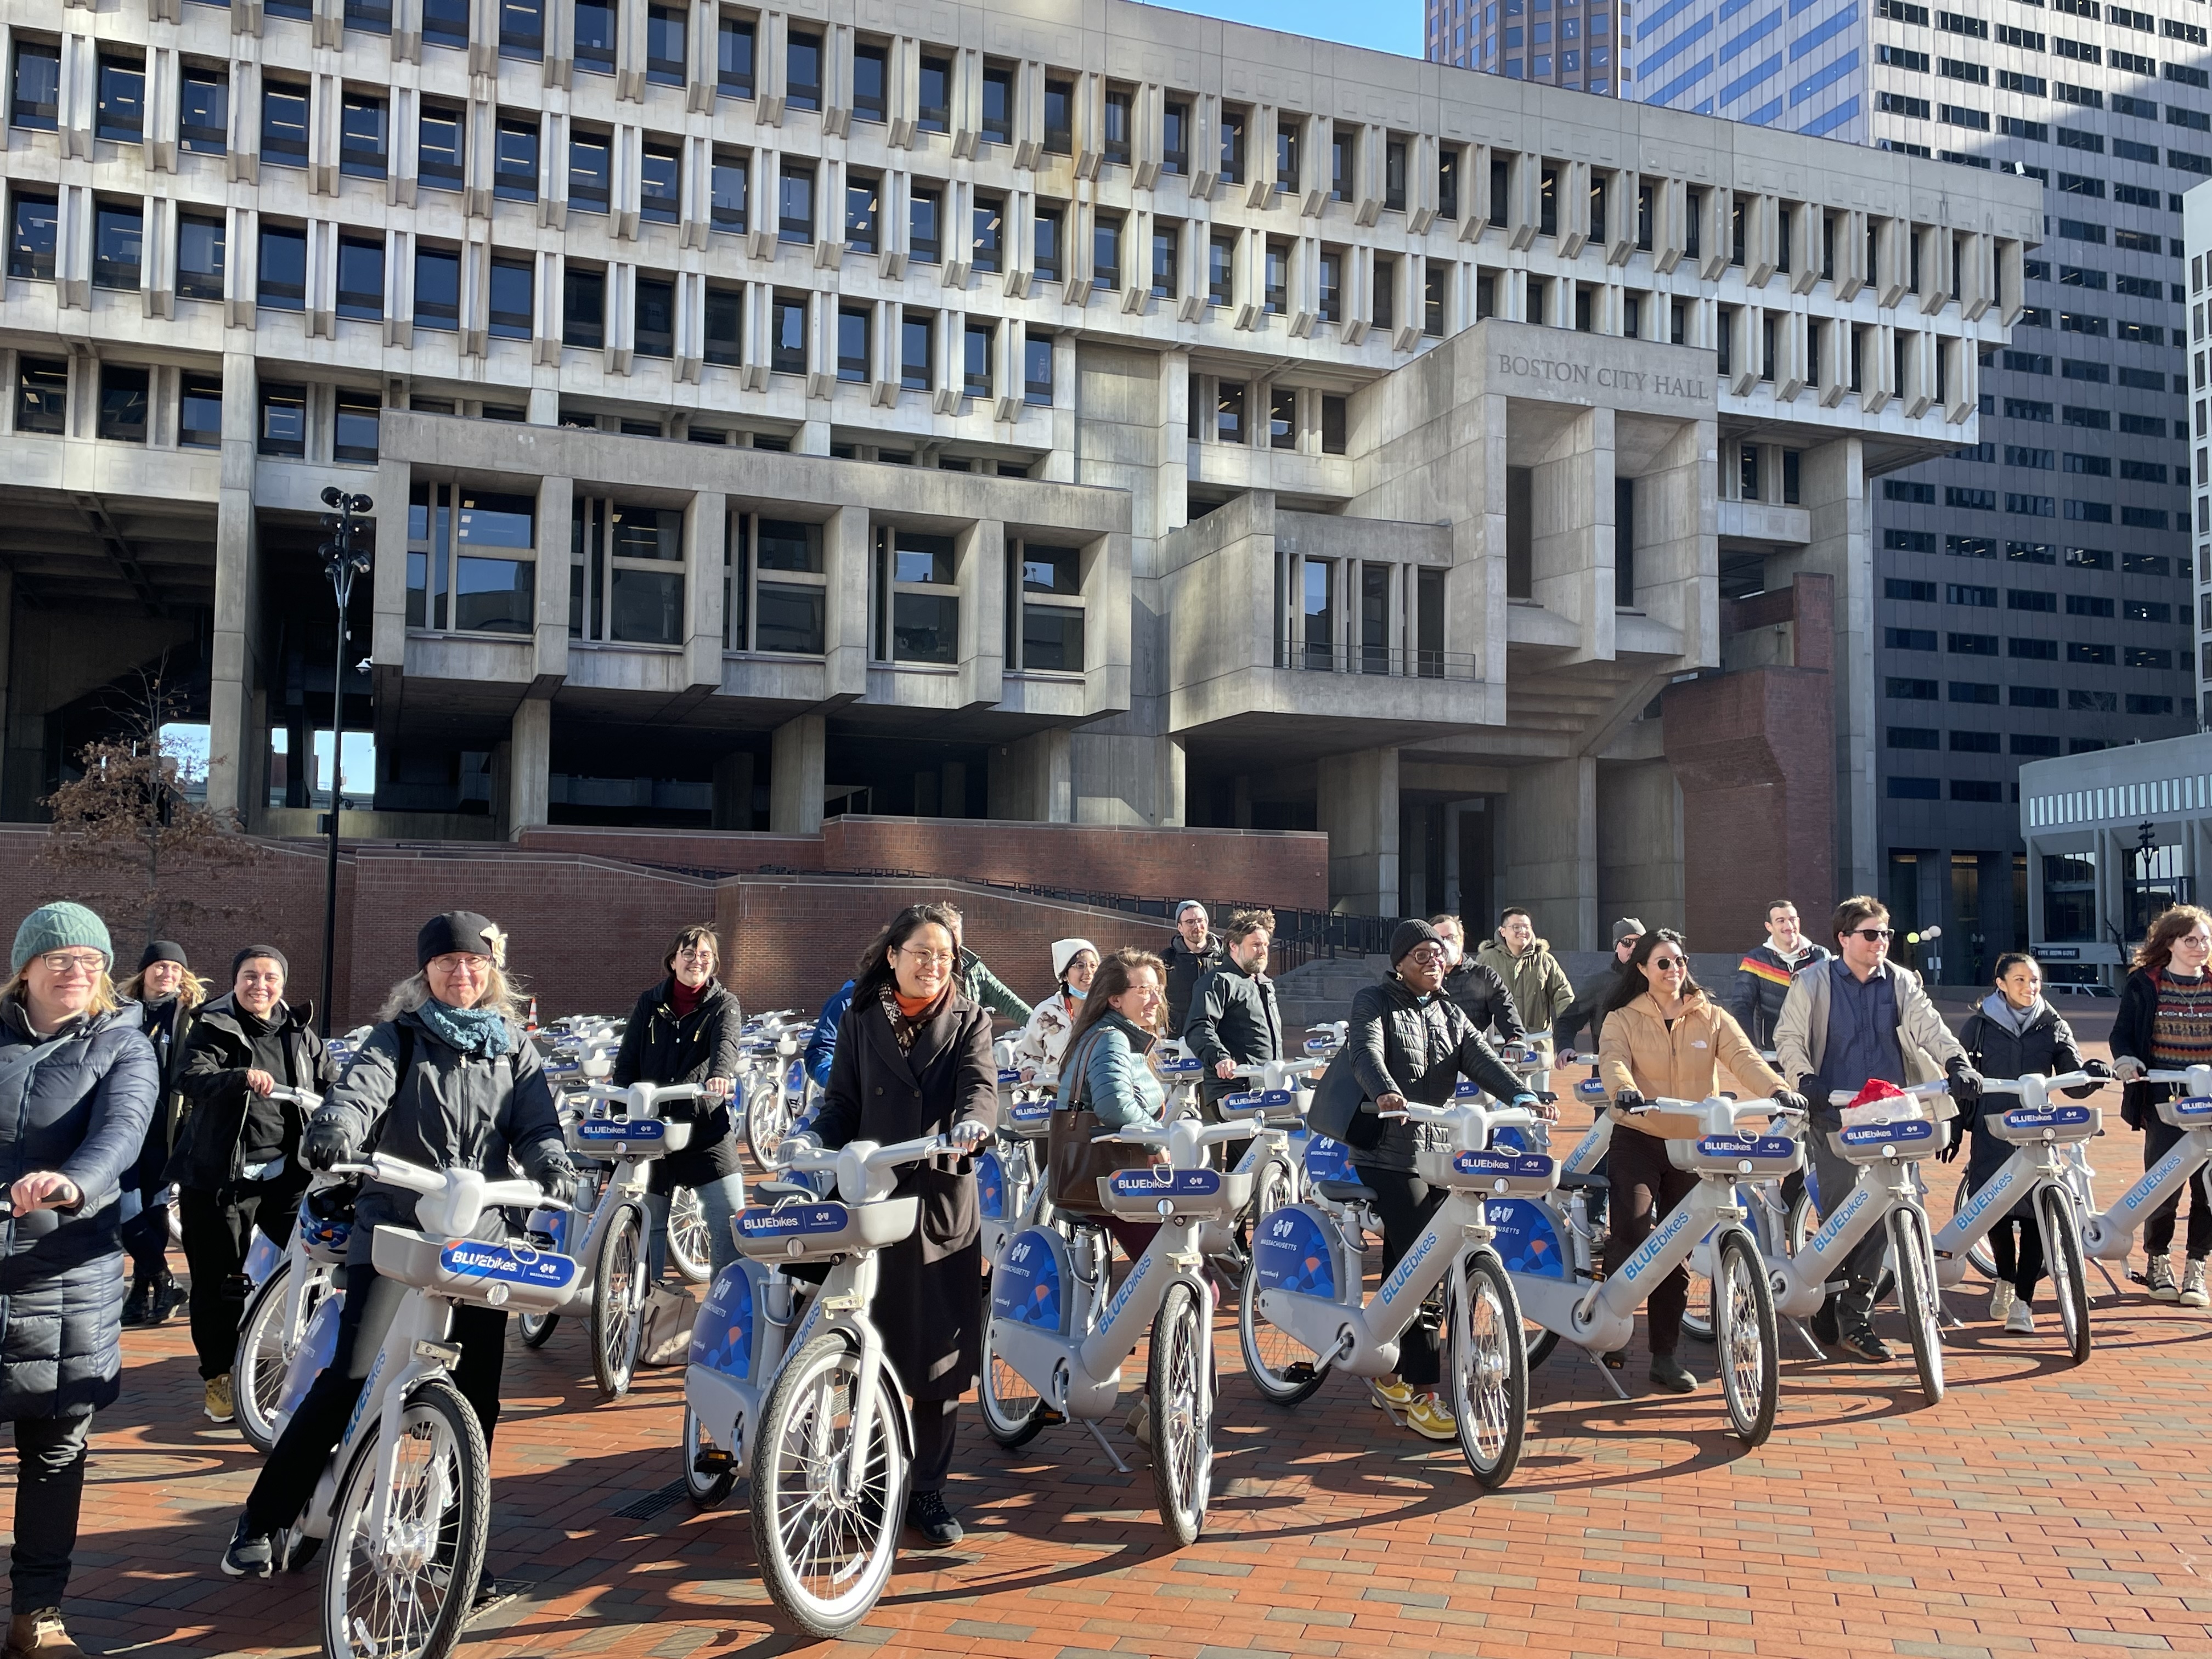 A crowd of people stand with new electric bikes in front of Boston City Hall